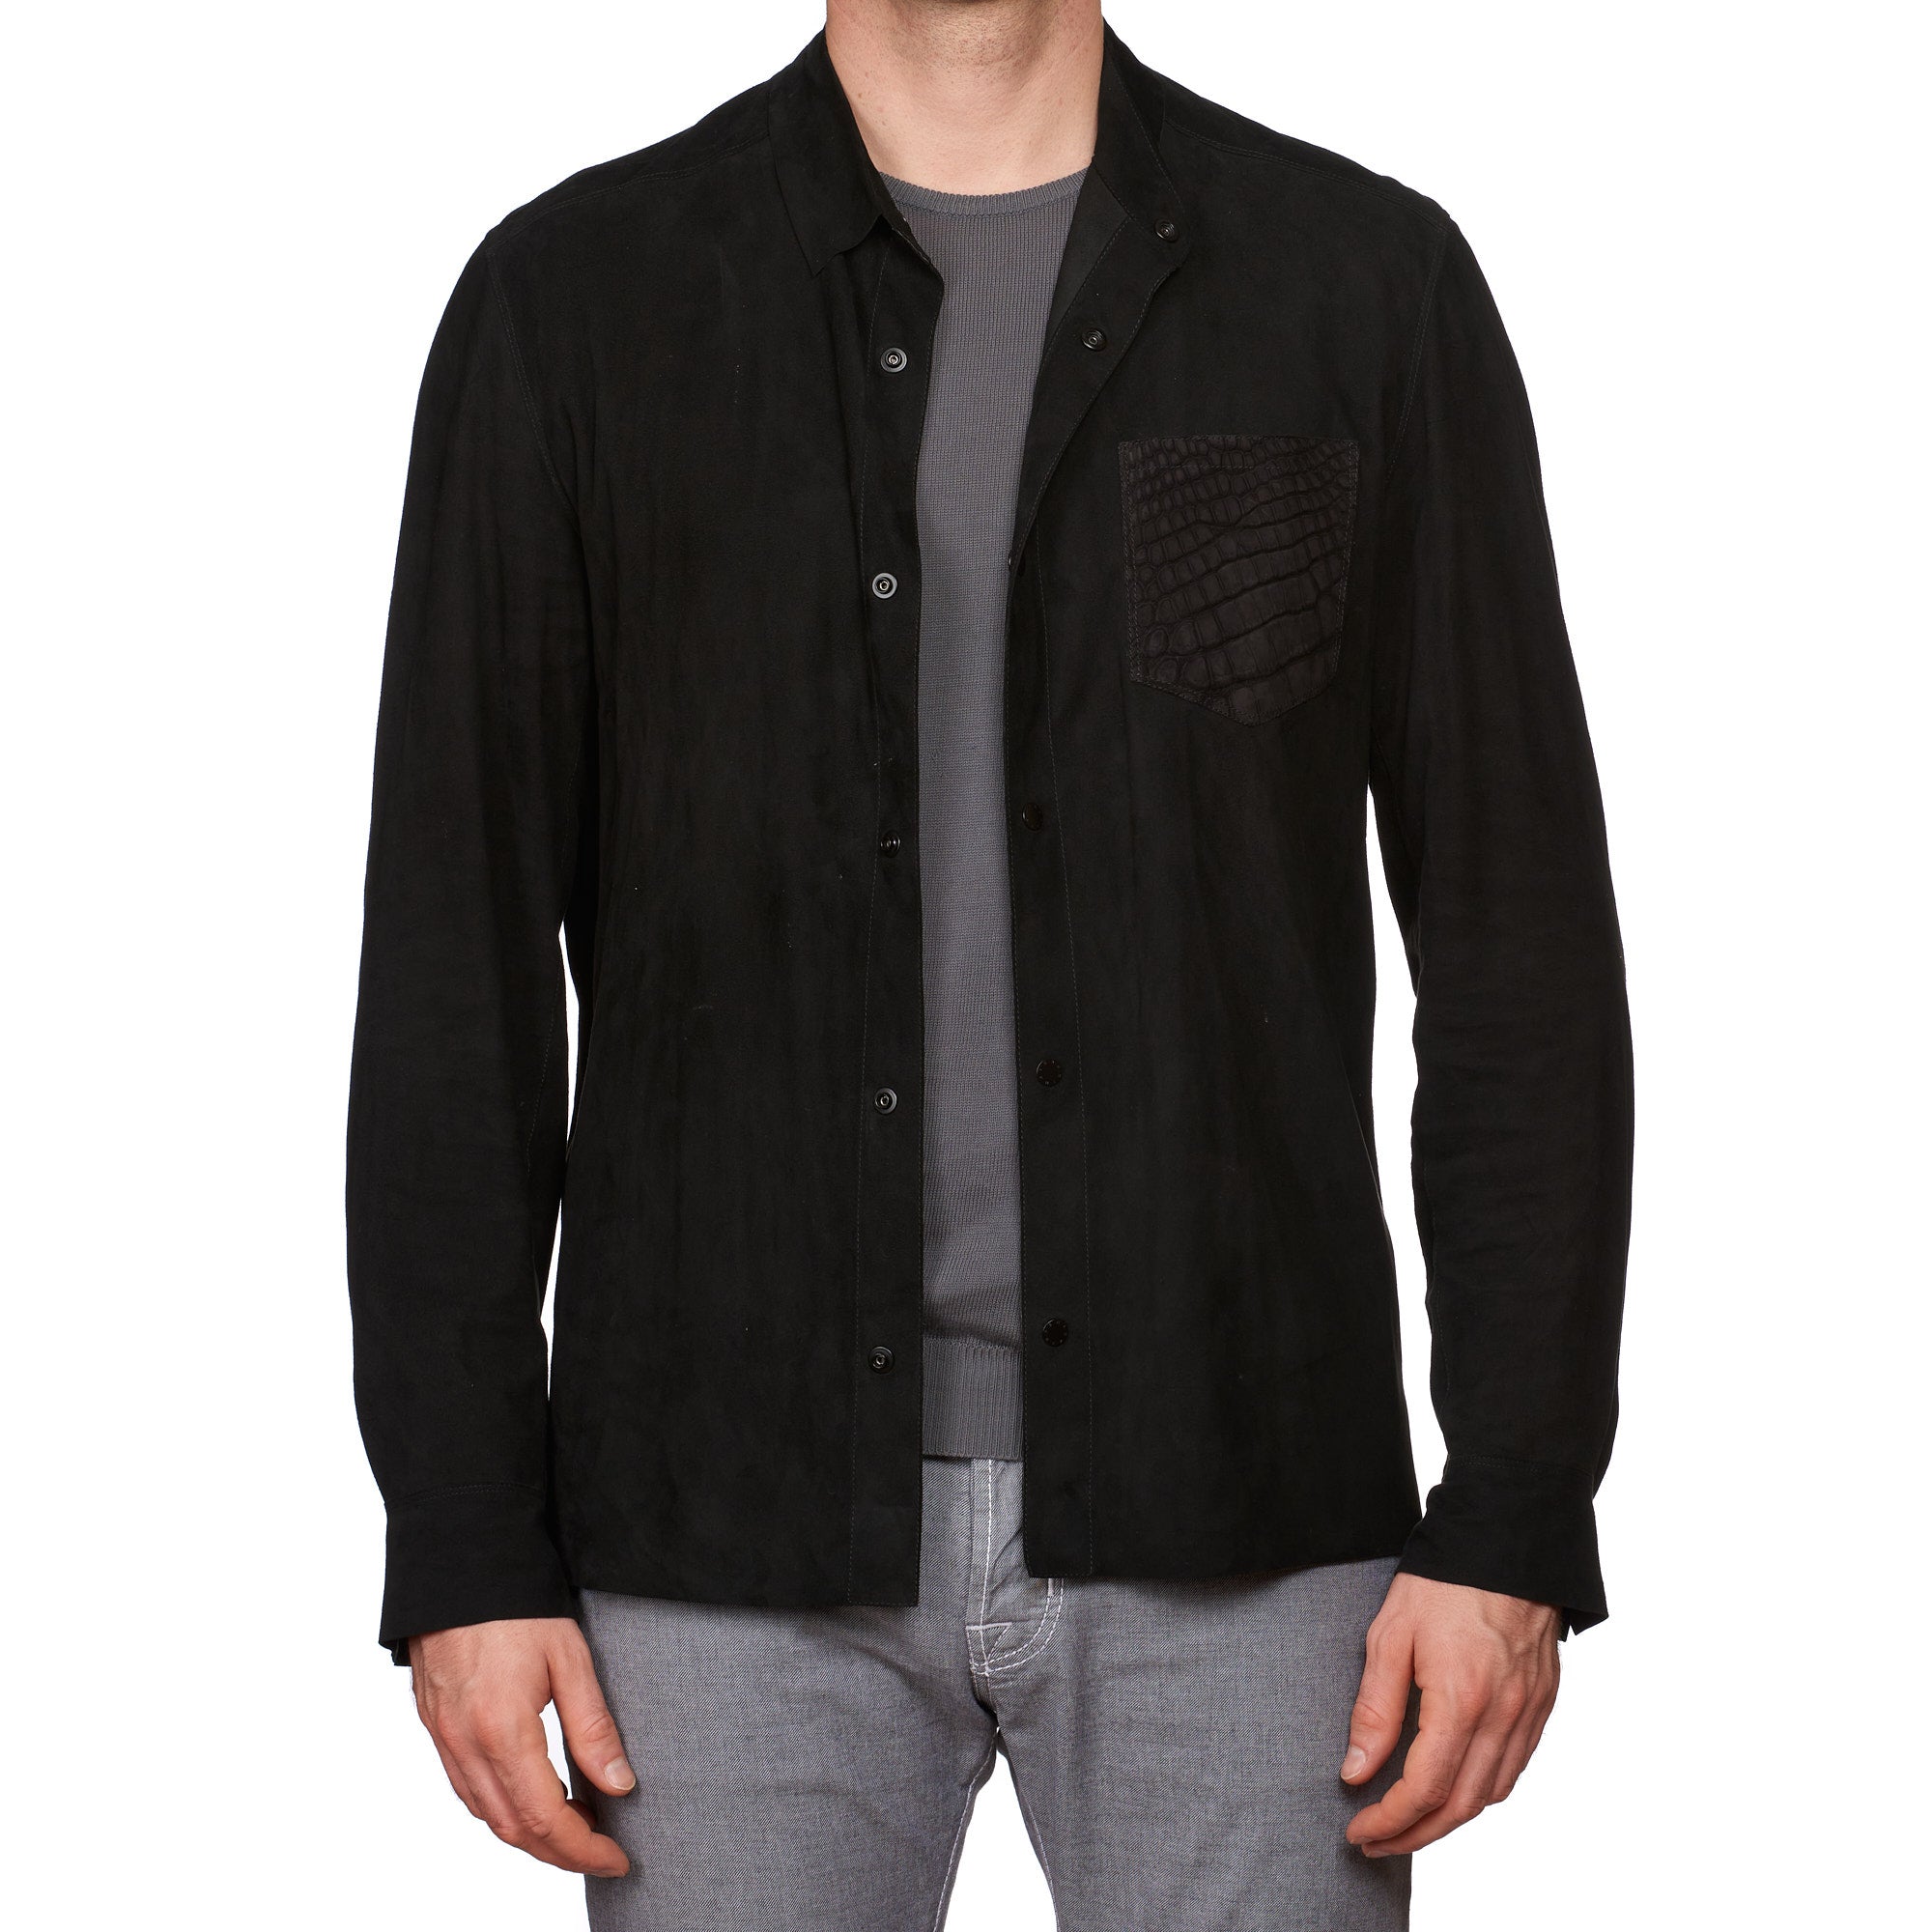 SERAPHIN Black Goat Suede Leather Shirt Jacket with Crocodile Pocket FR 50 US M NEW